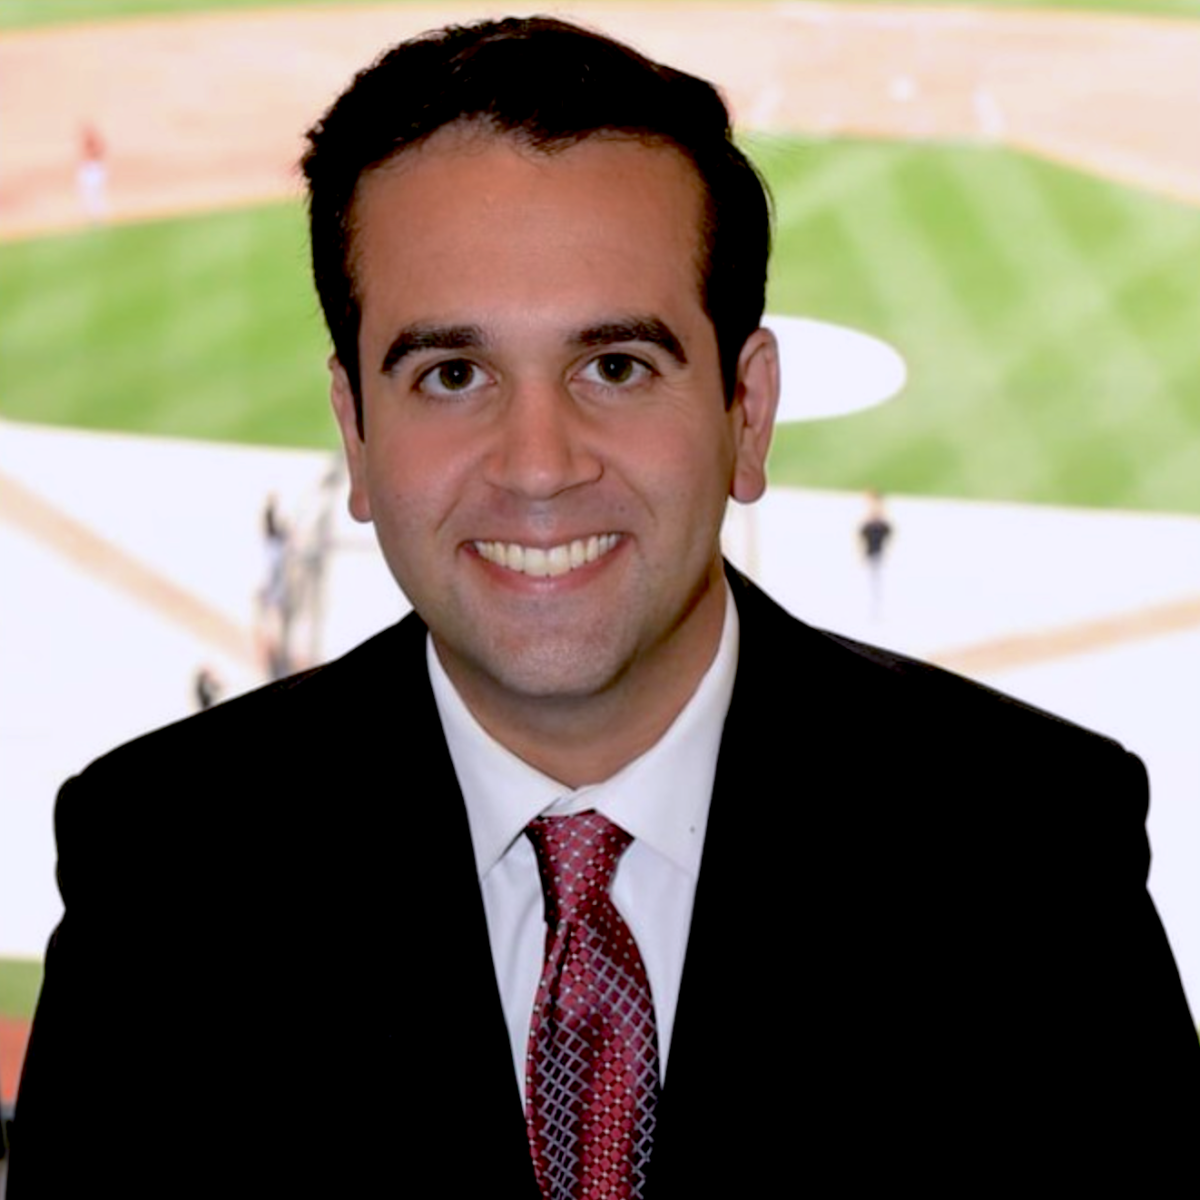 Man in a suit and tie smiles as he sits in a television booth above a baseball field 